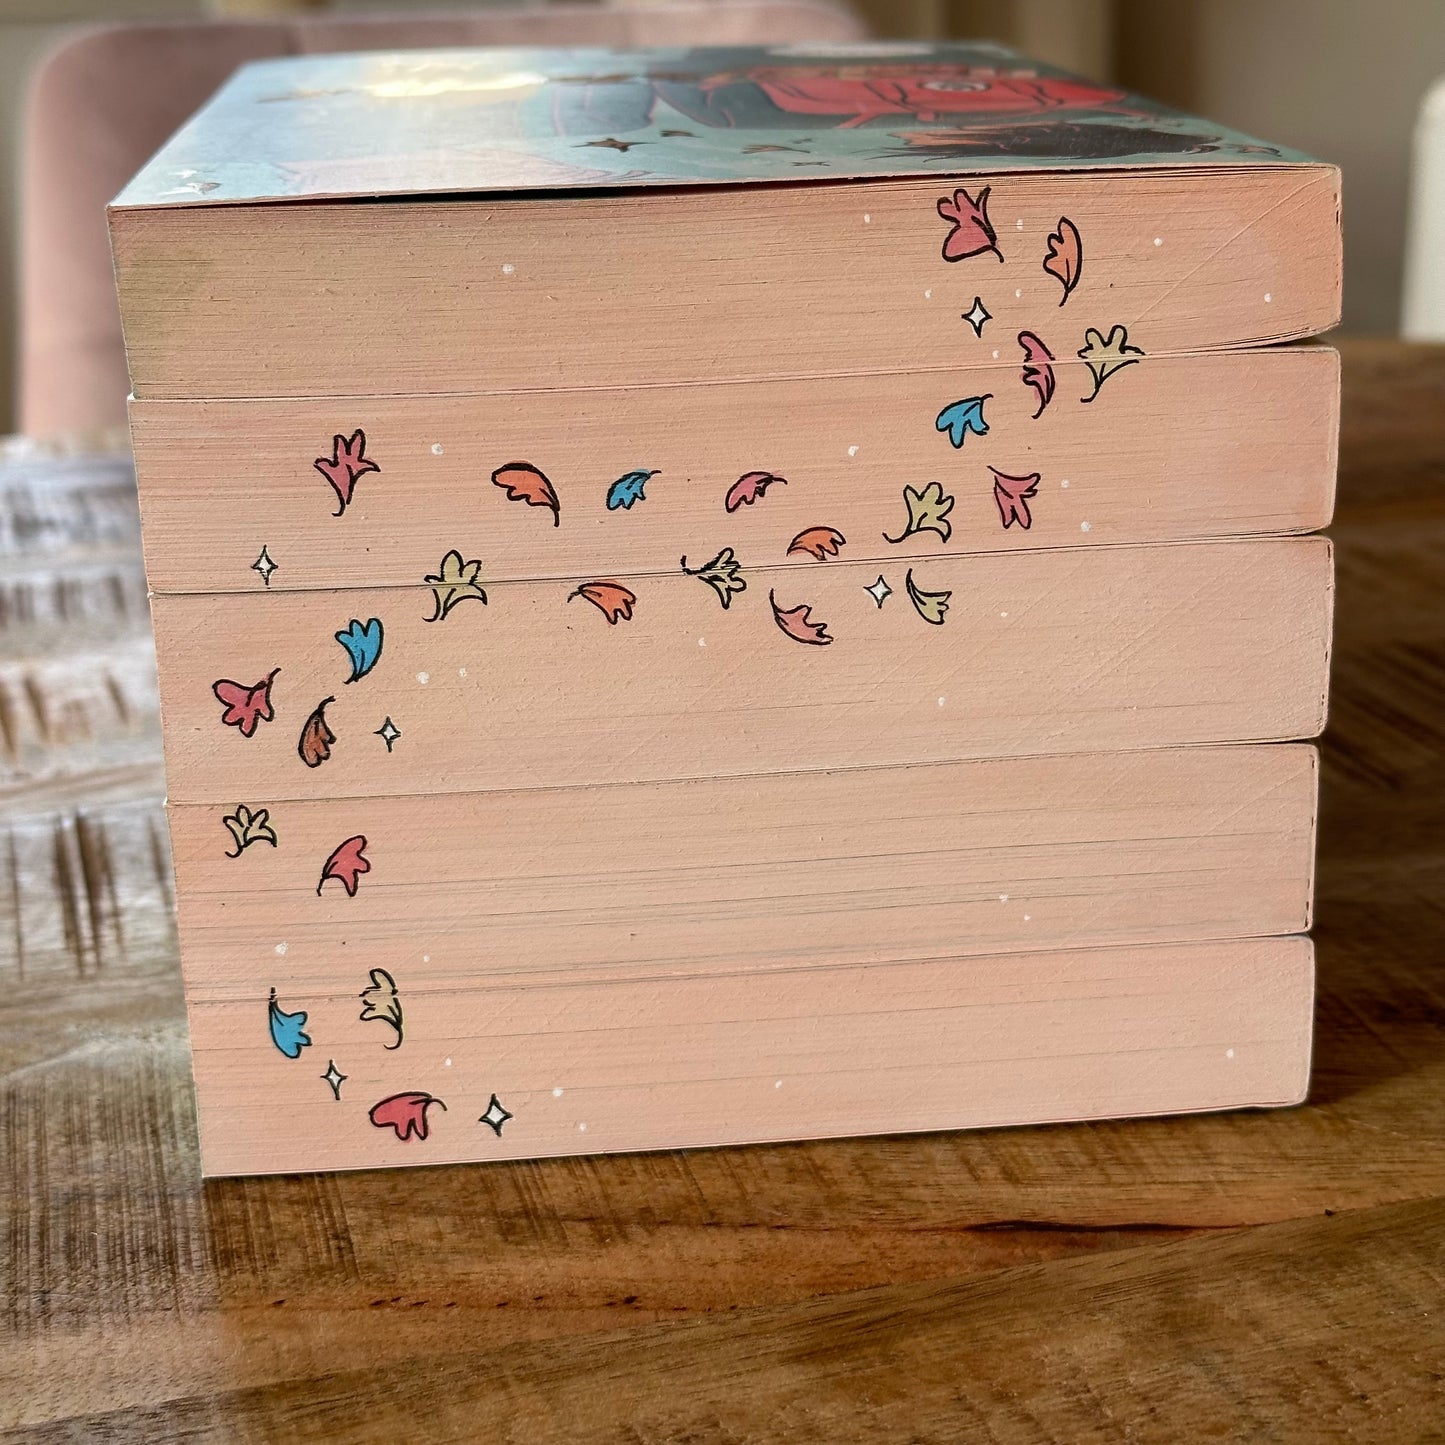 Heartstopper 1-5 - Fore-edge Painting